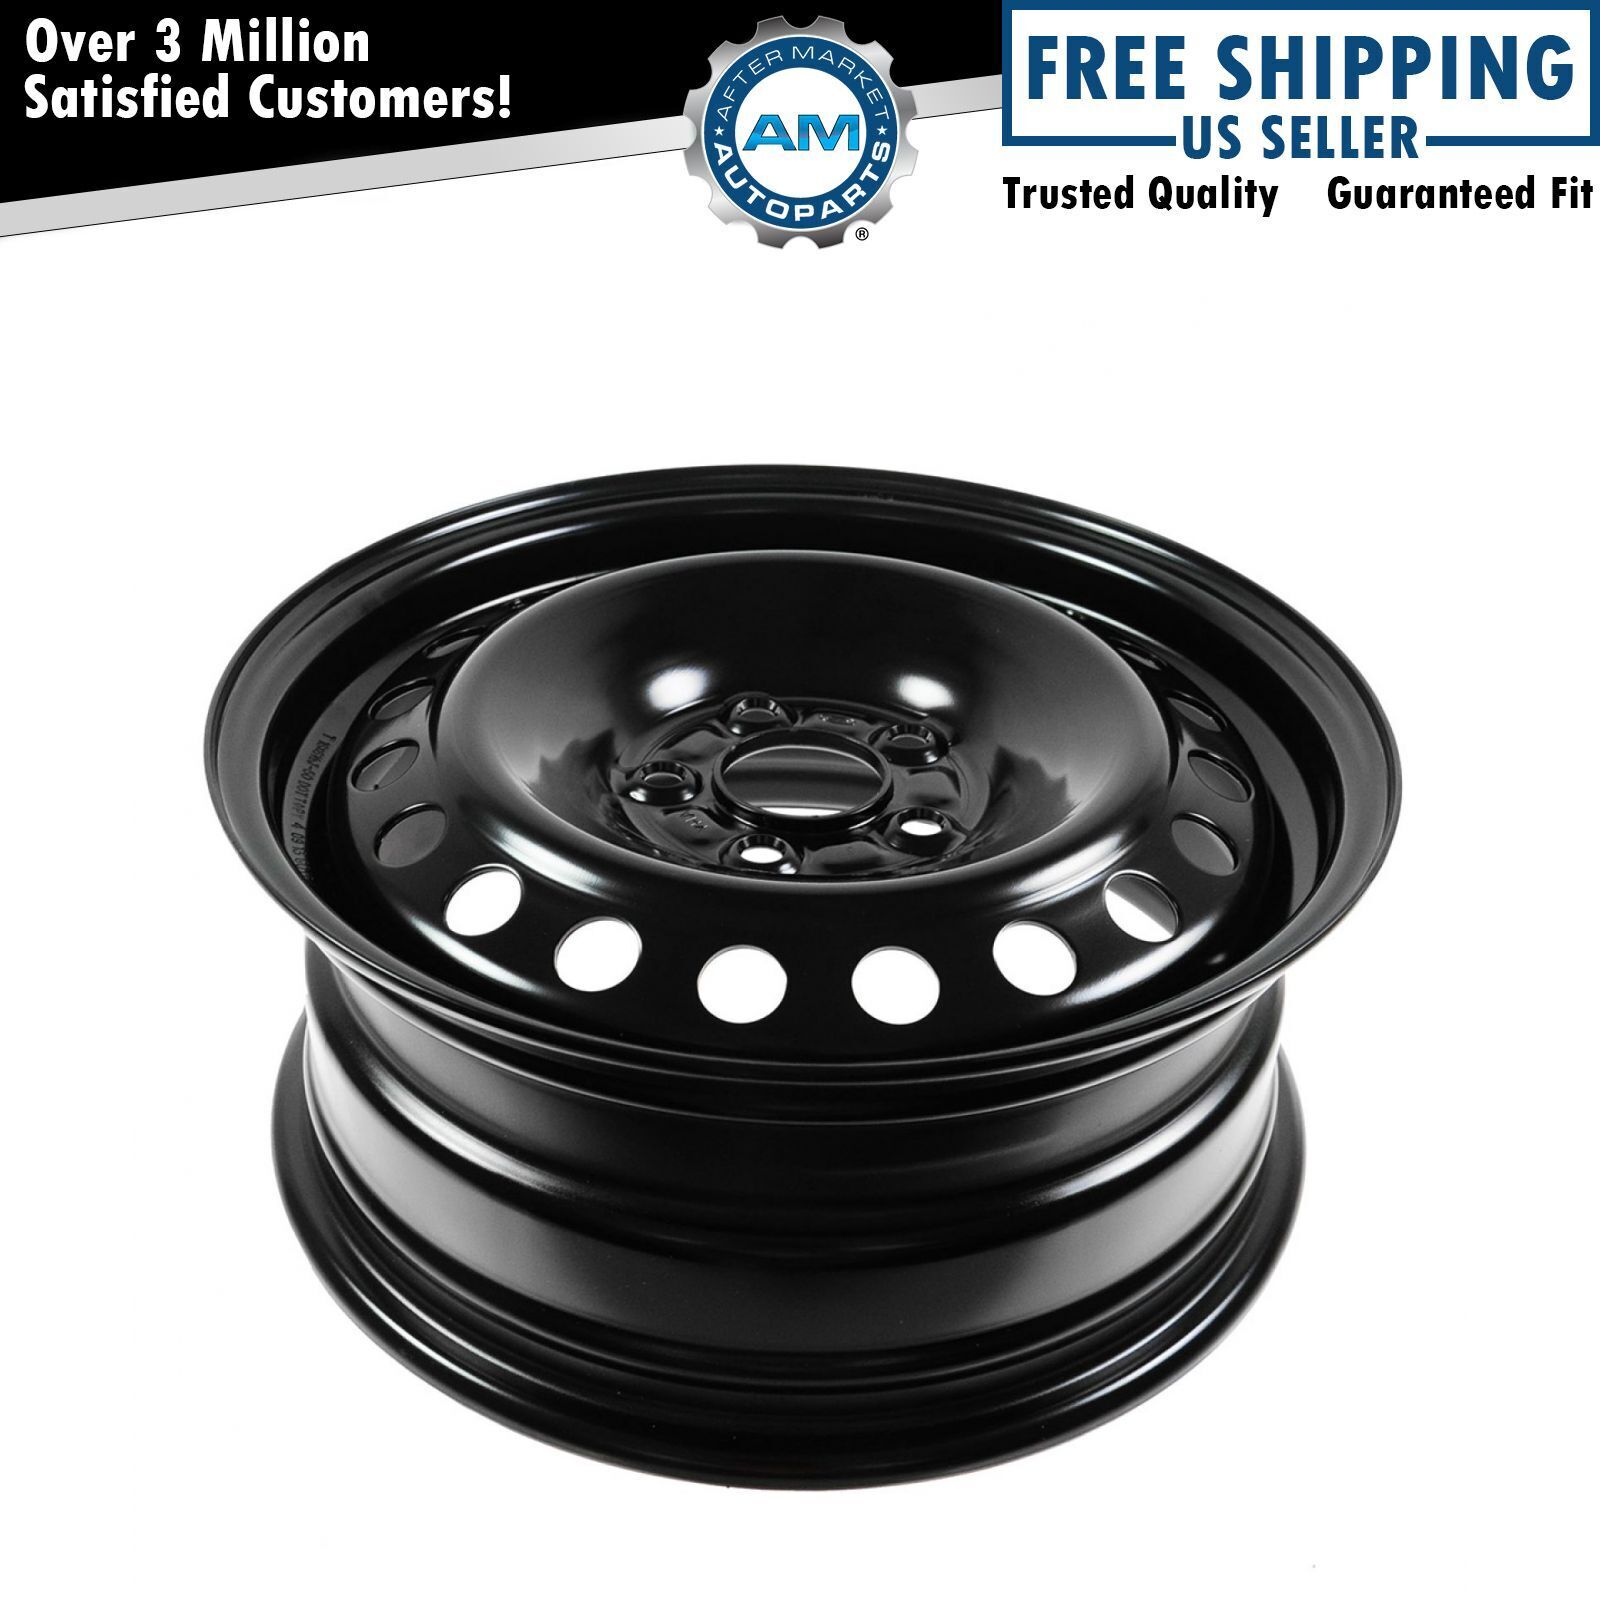 16 inch Steel Replacement Wheel Rim New EACH for 12-13 Ford Focus Fusion